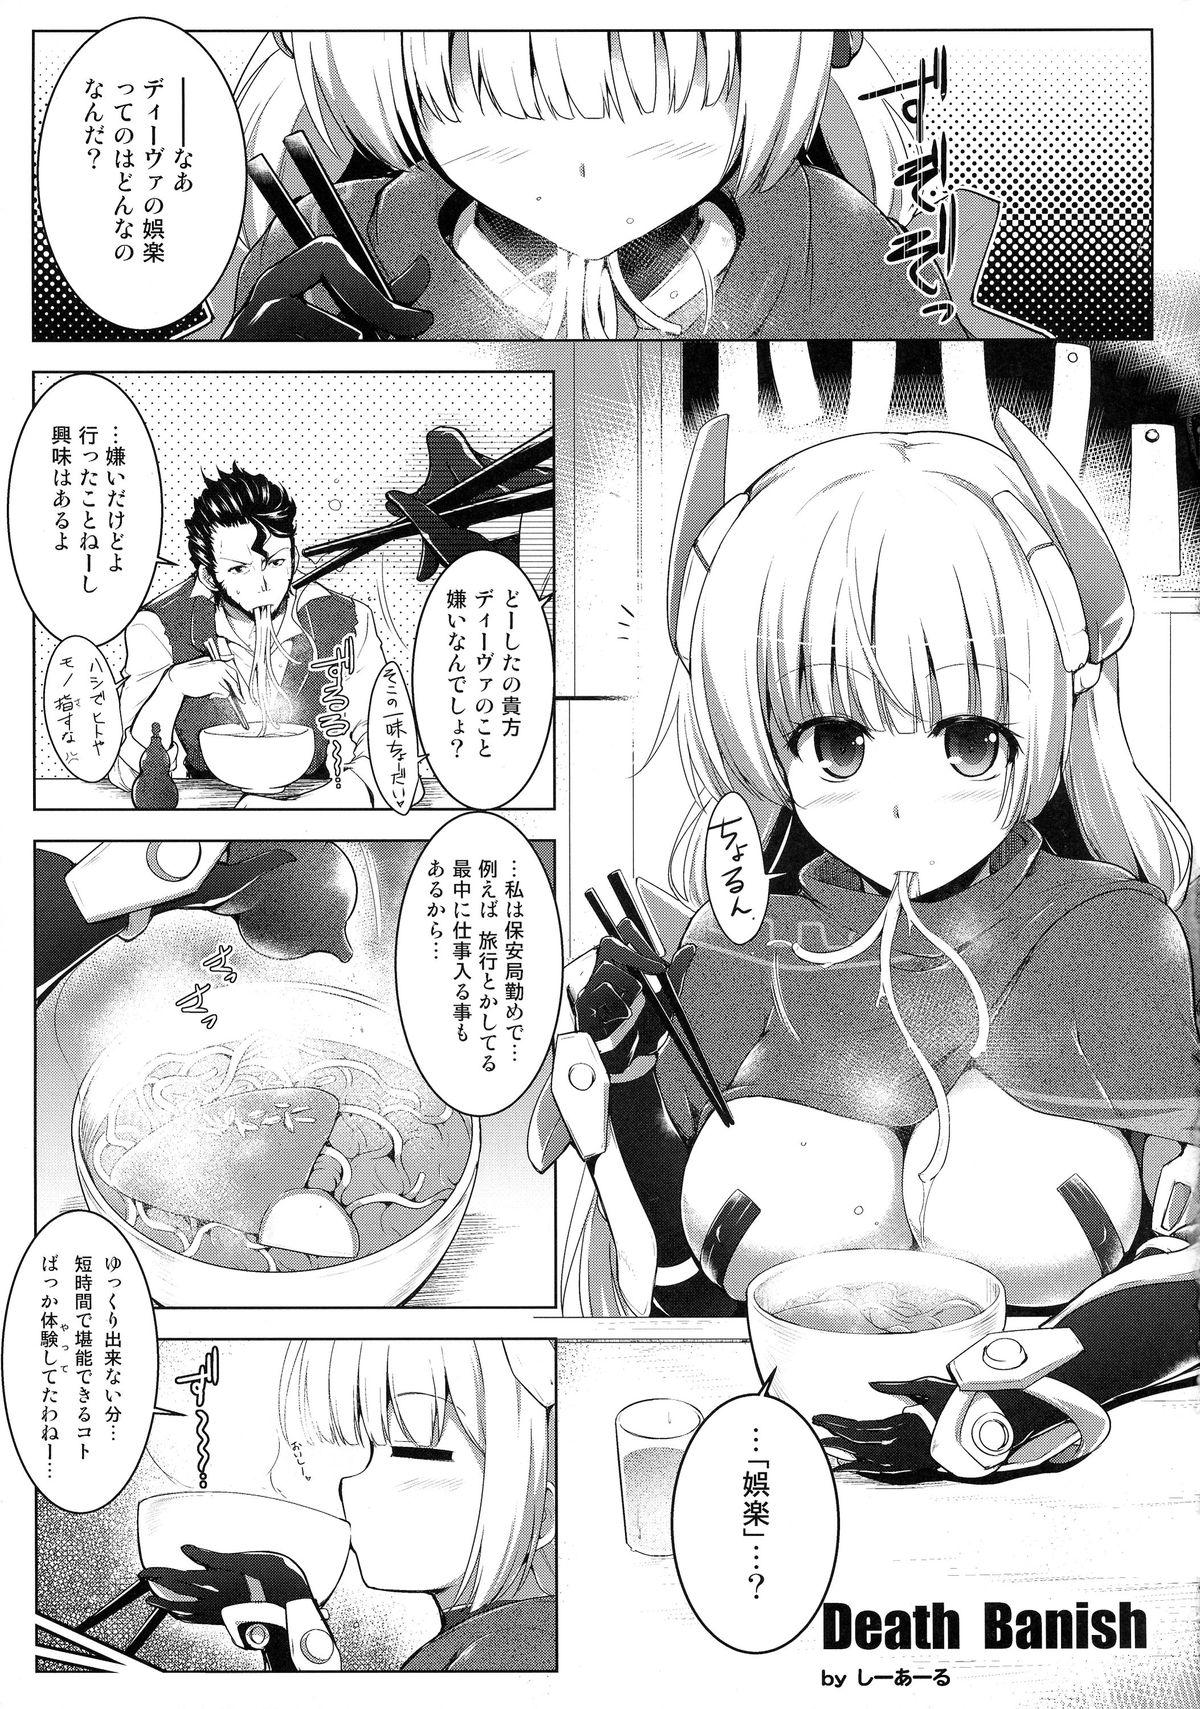 Latinas K.231 - Expelled from paradise Blowjob - Page 5